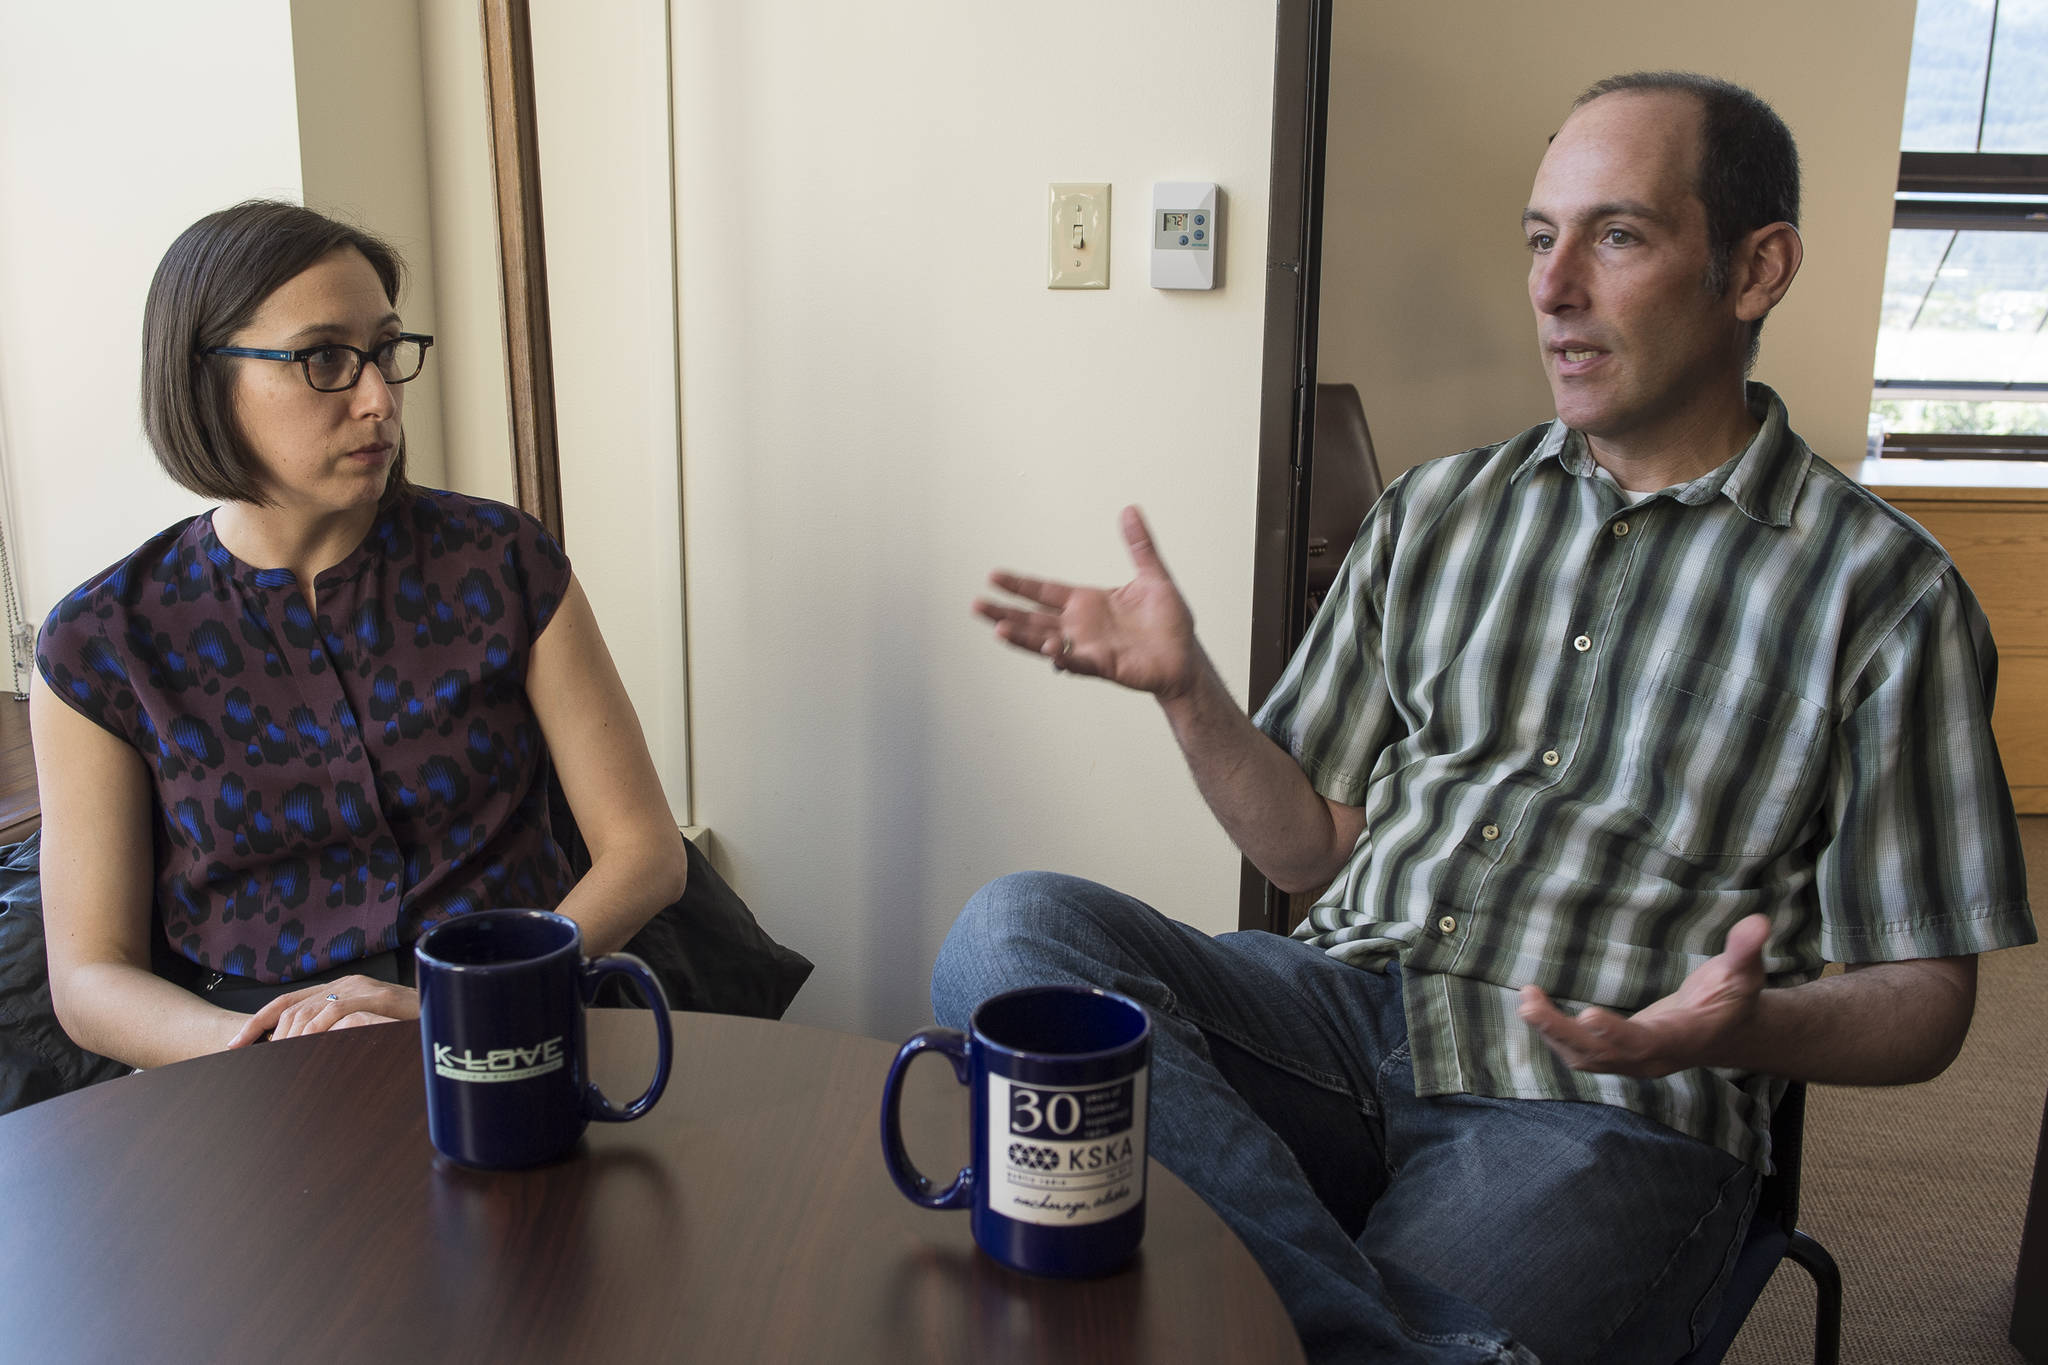 A Senior Advisor to Gov. Bill Walker, Nikoosh Carlo, left, and Michael LeVine, a member of Walker’s climate change task force, talk about upcoming recommendations on Thursday, Sept. 6, 2018. (Michael Penn | Juneau Empire)